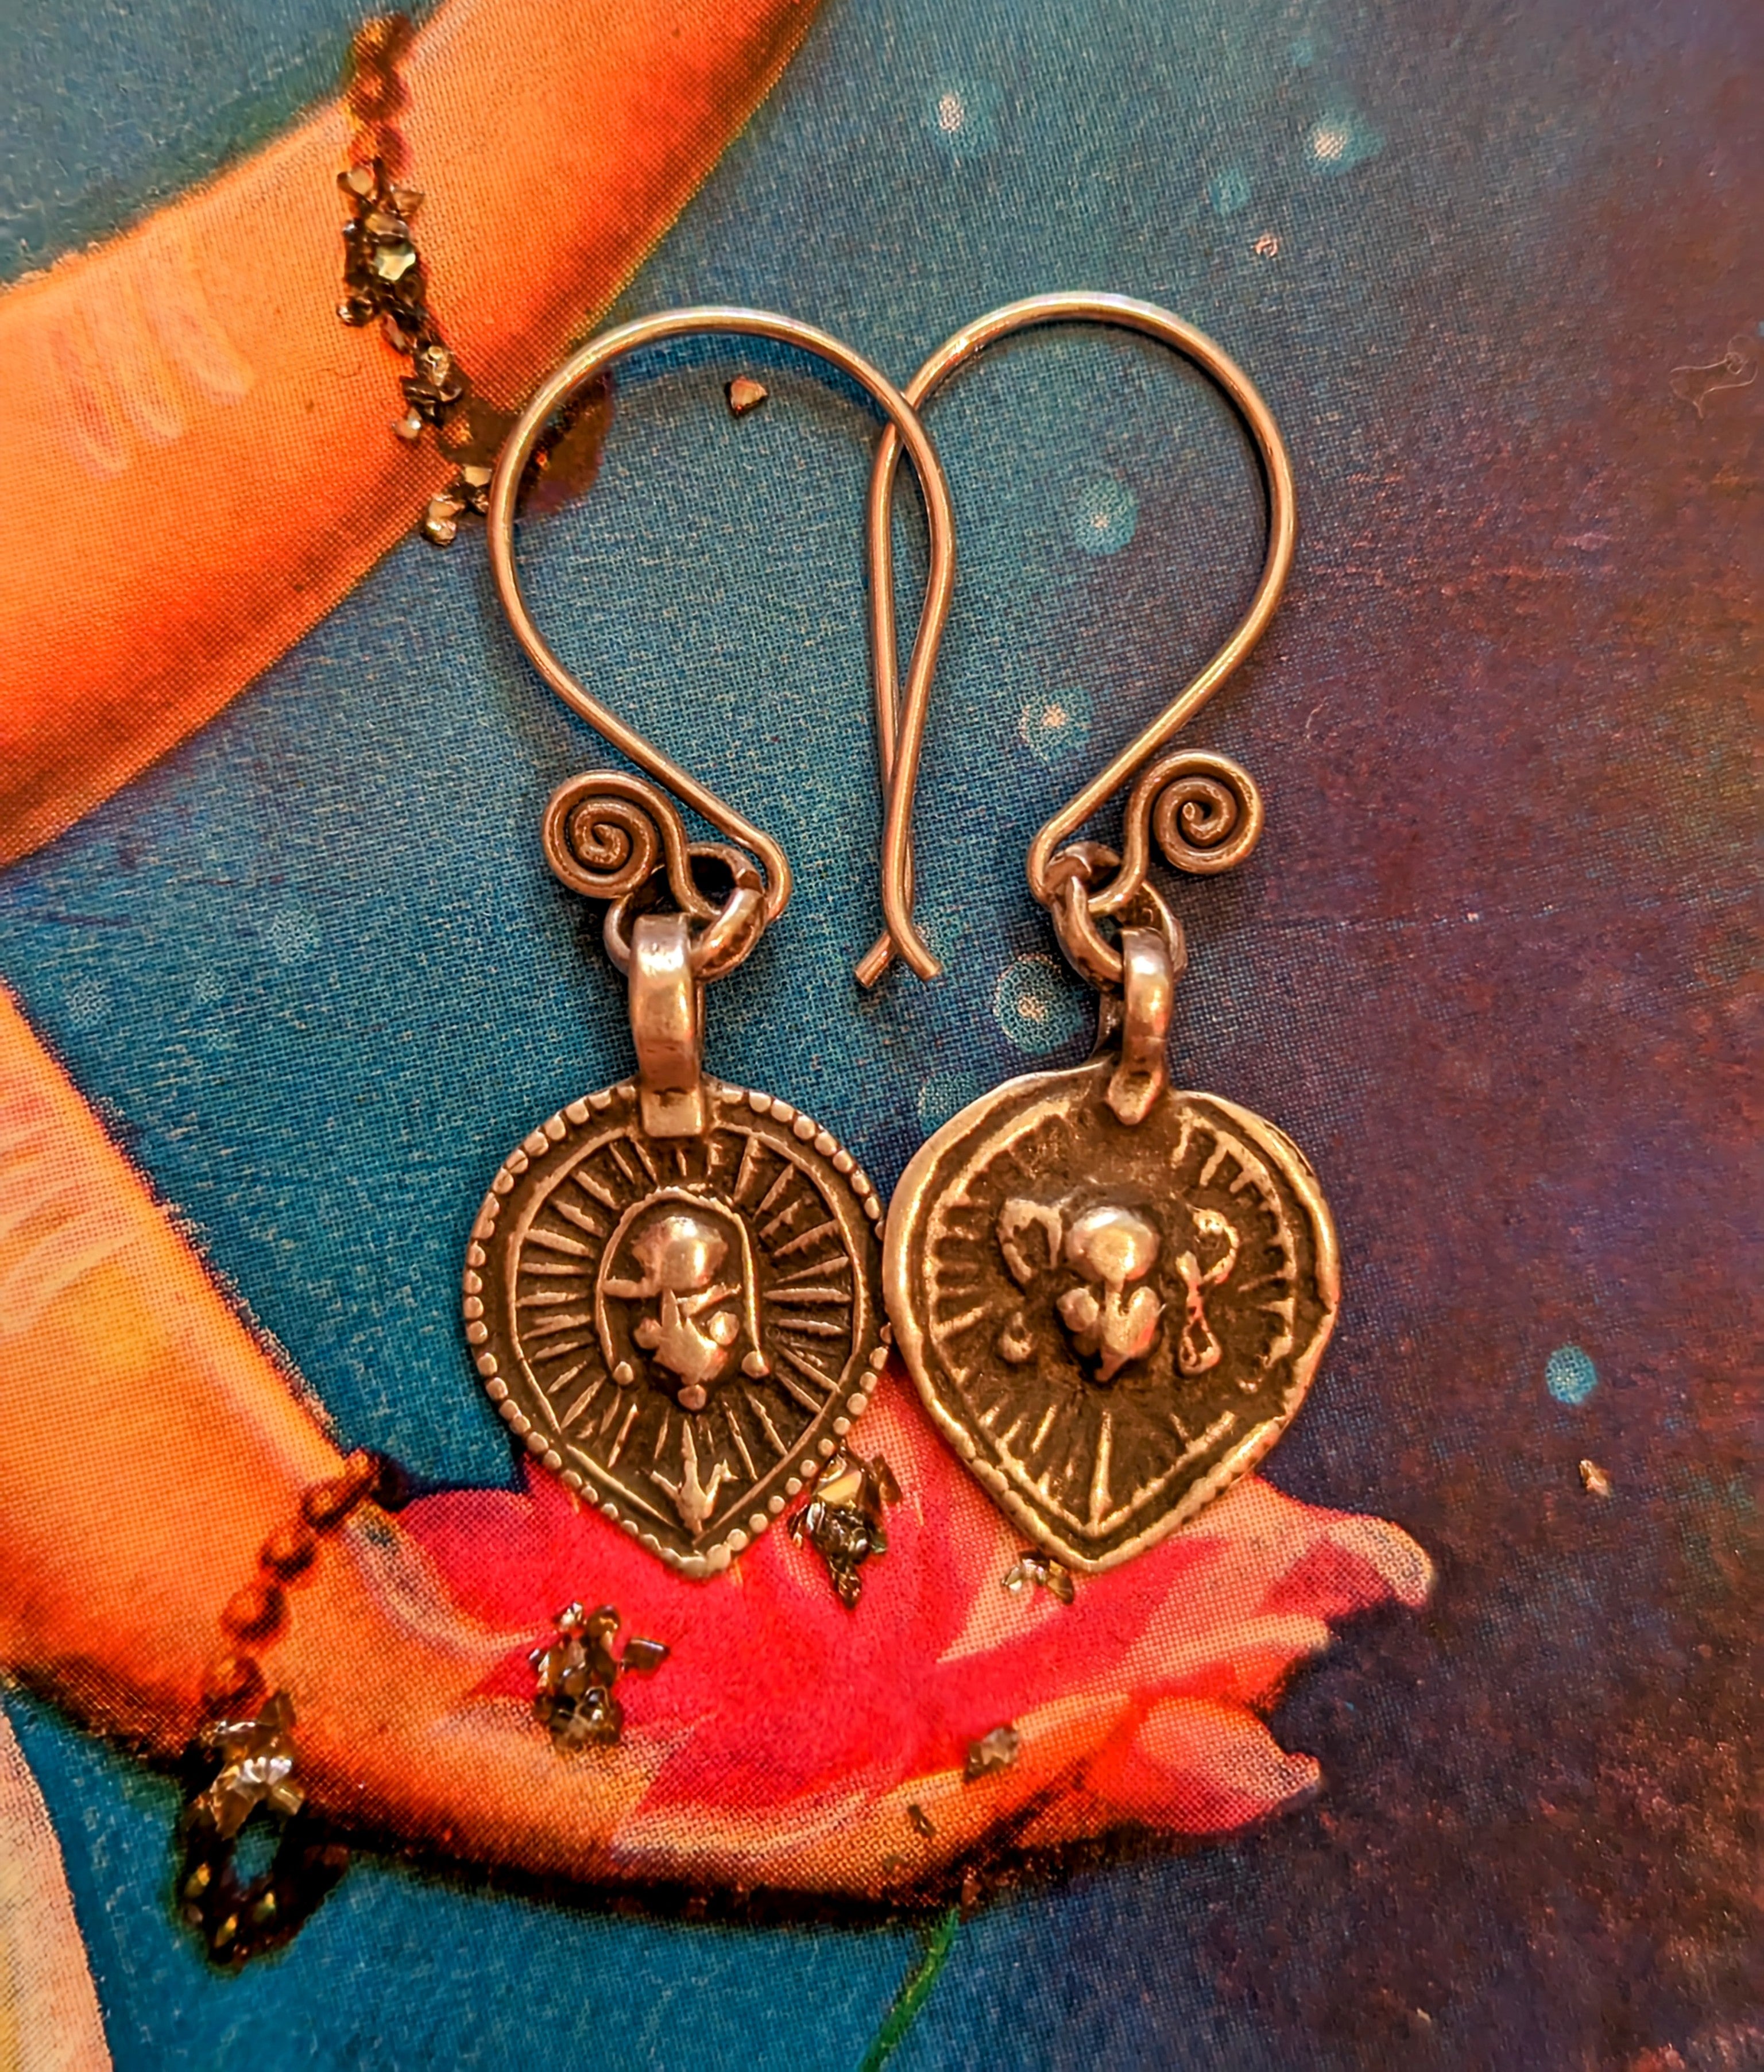 Antique Indian amulet earrings